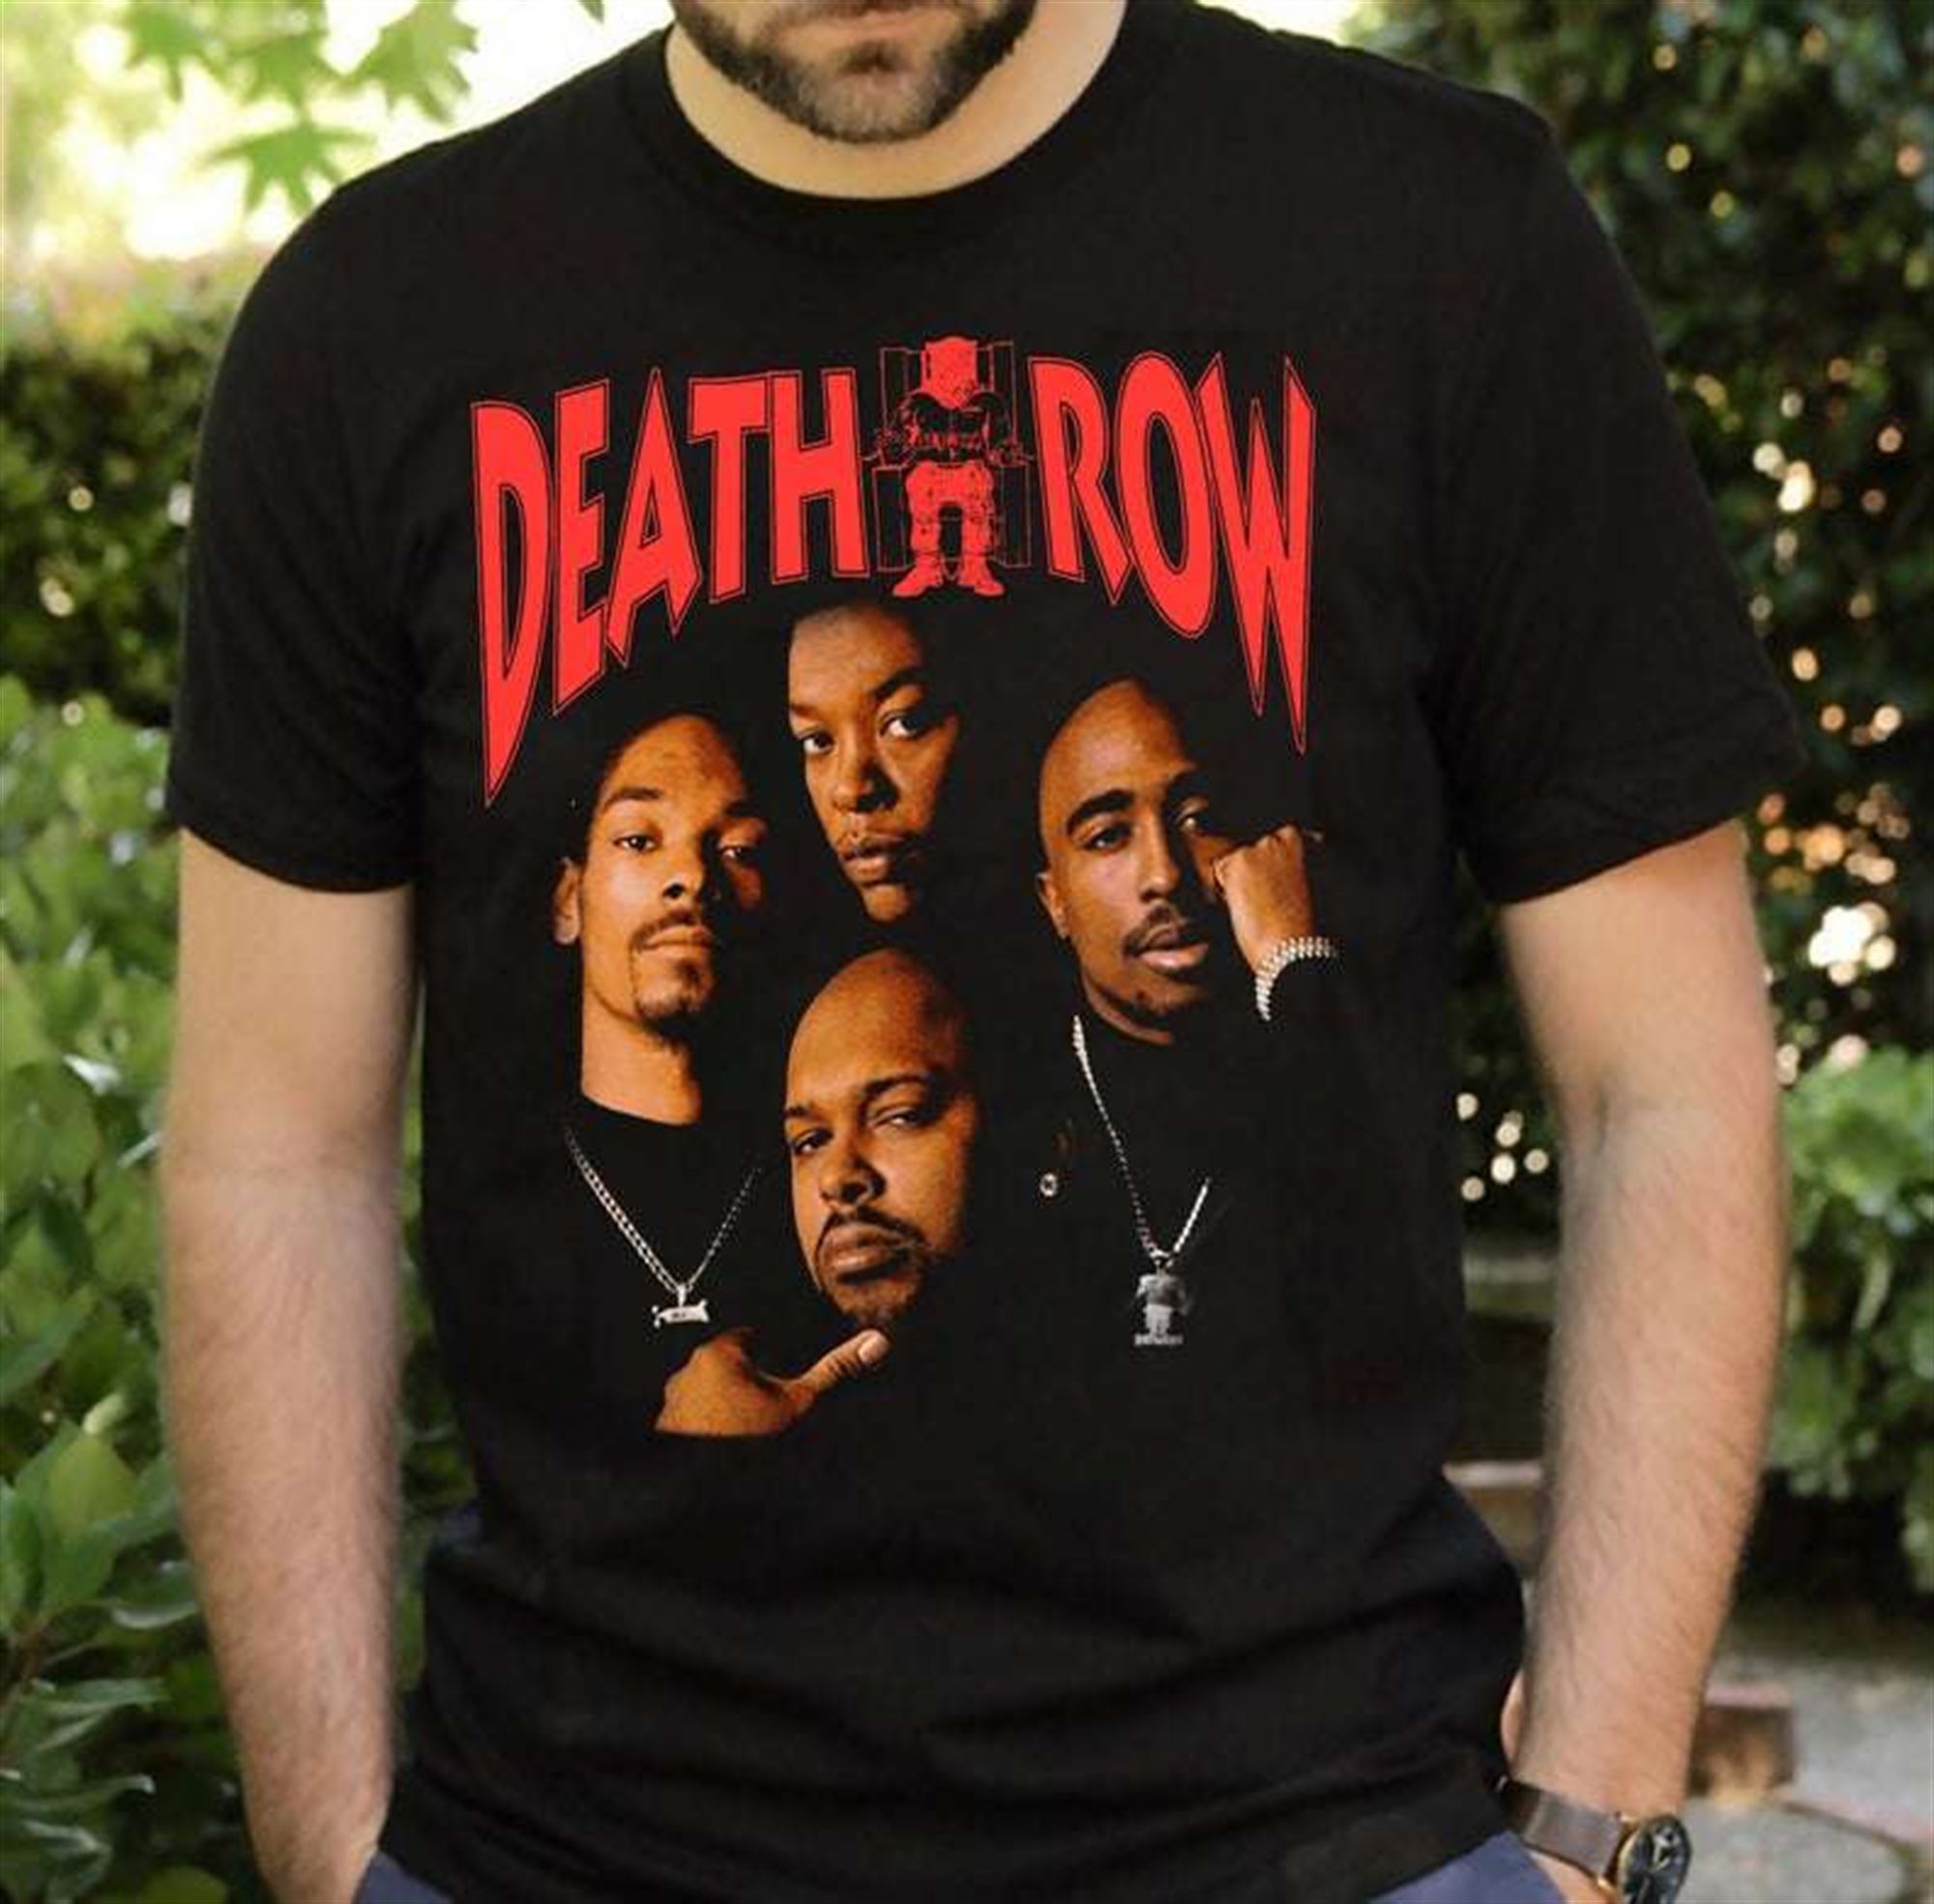 Death Row Records Vintage Classic Unisex T Shirt Size Up To 5xl